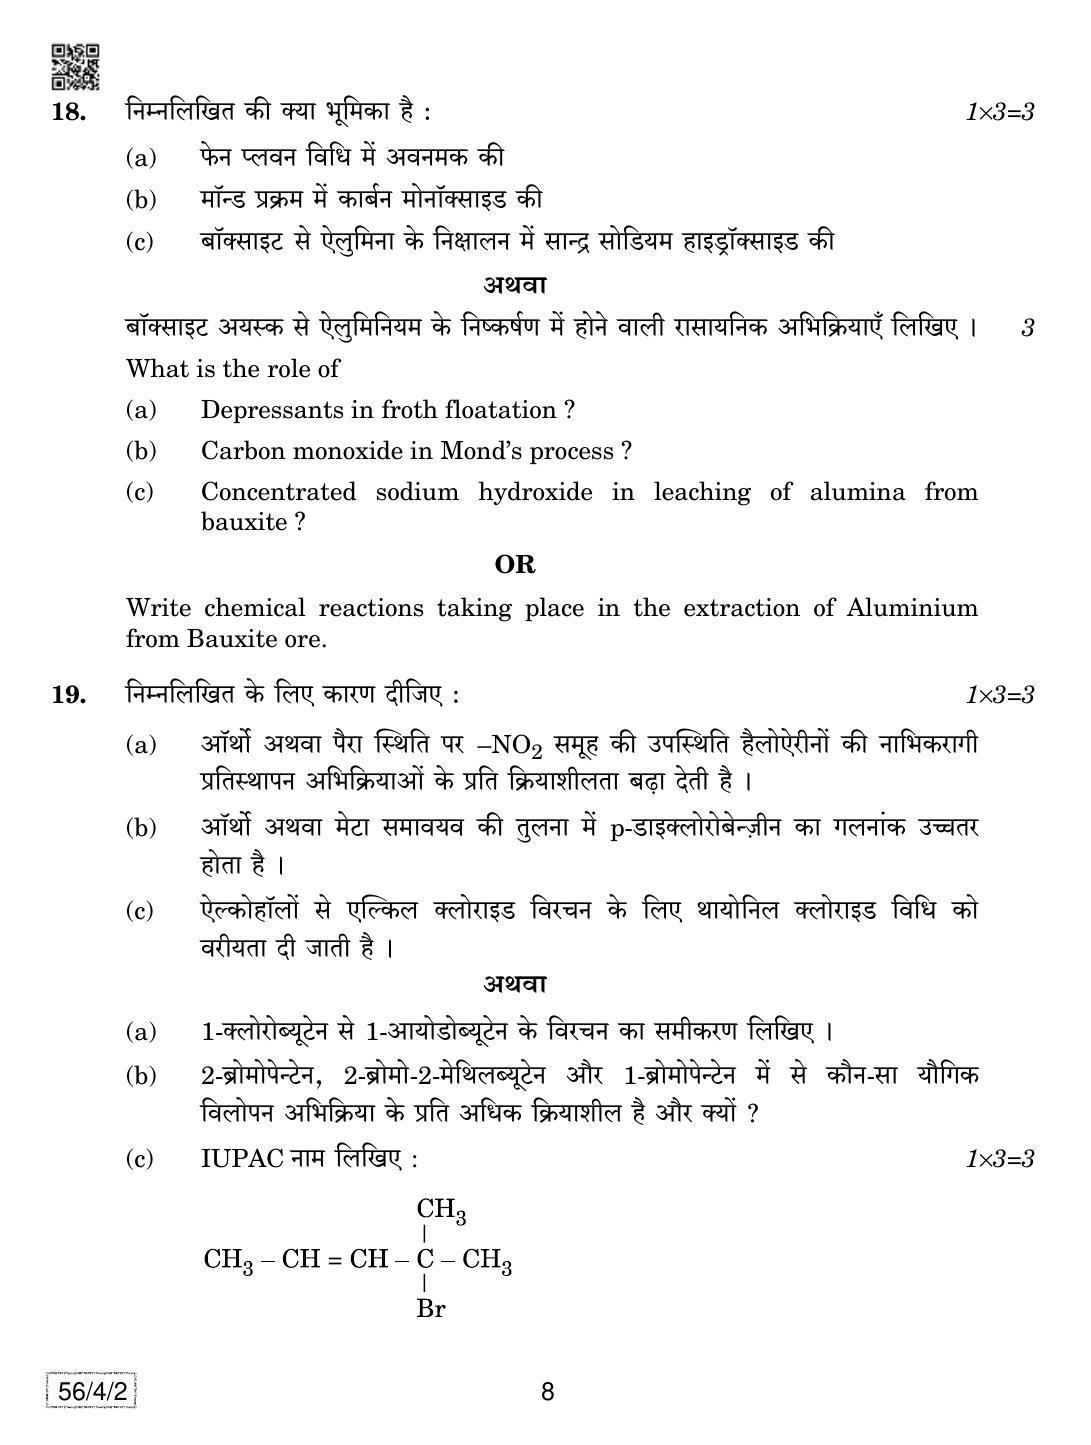 CBSE Class 12 56-4-2 Chemistry 2019 Question Paper - Page 8